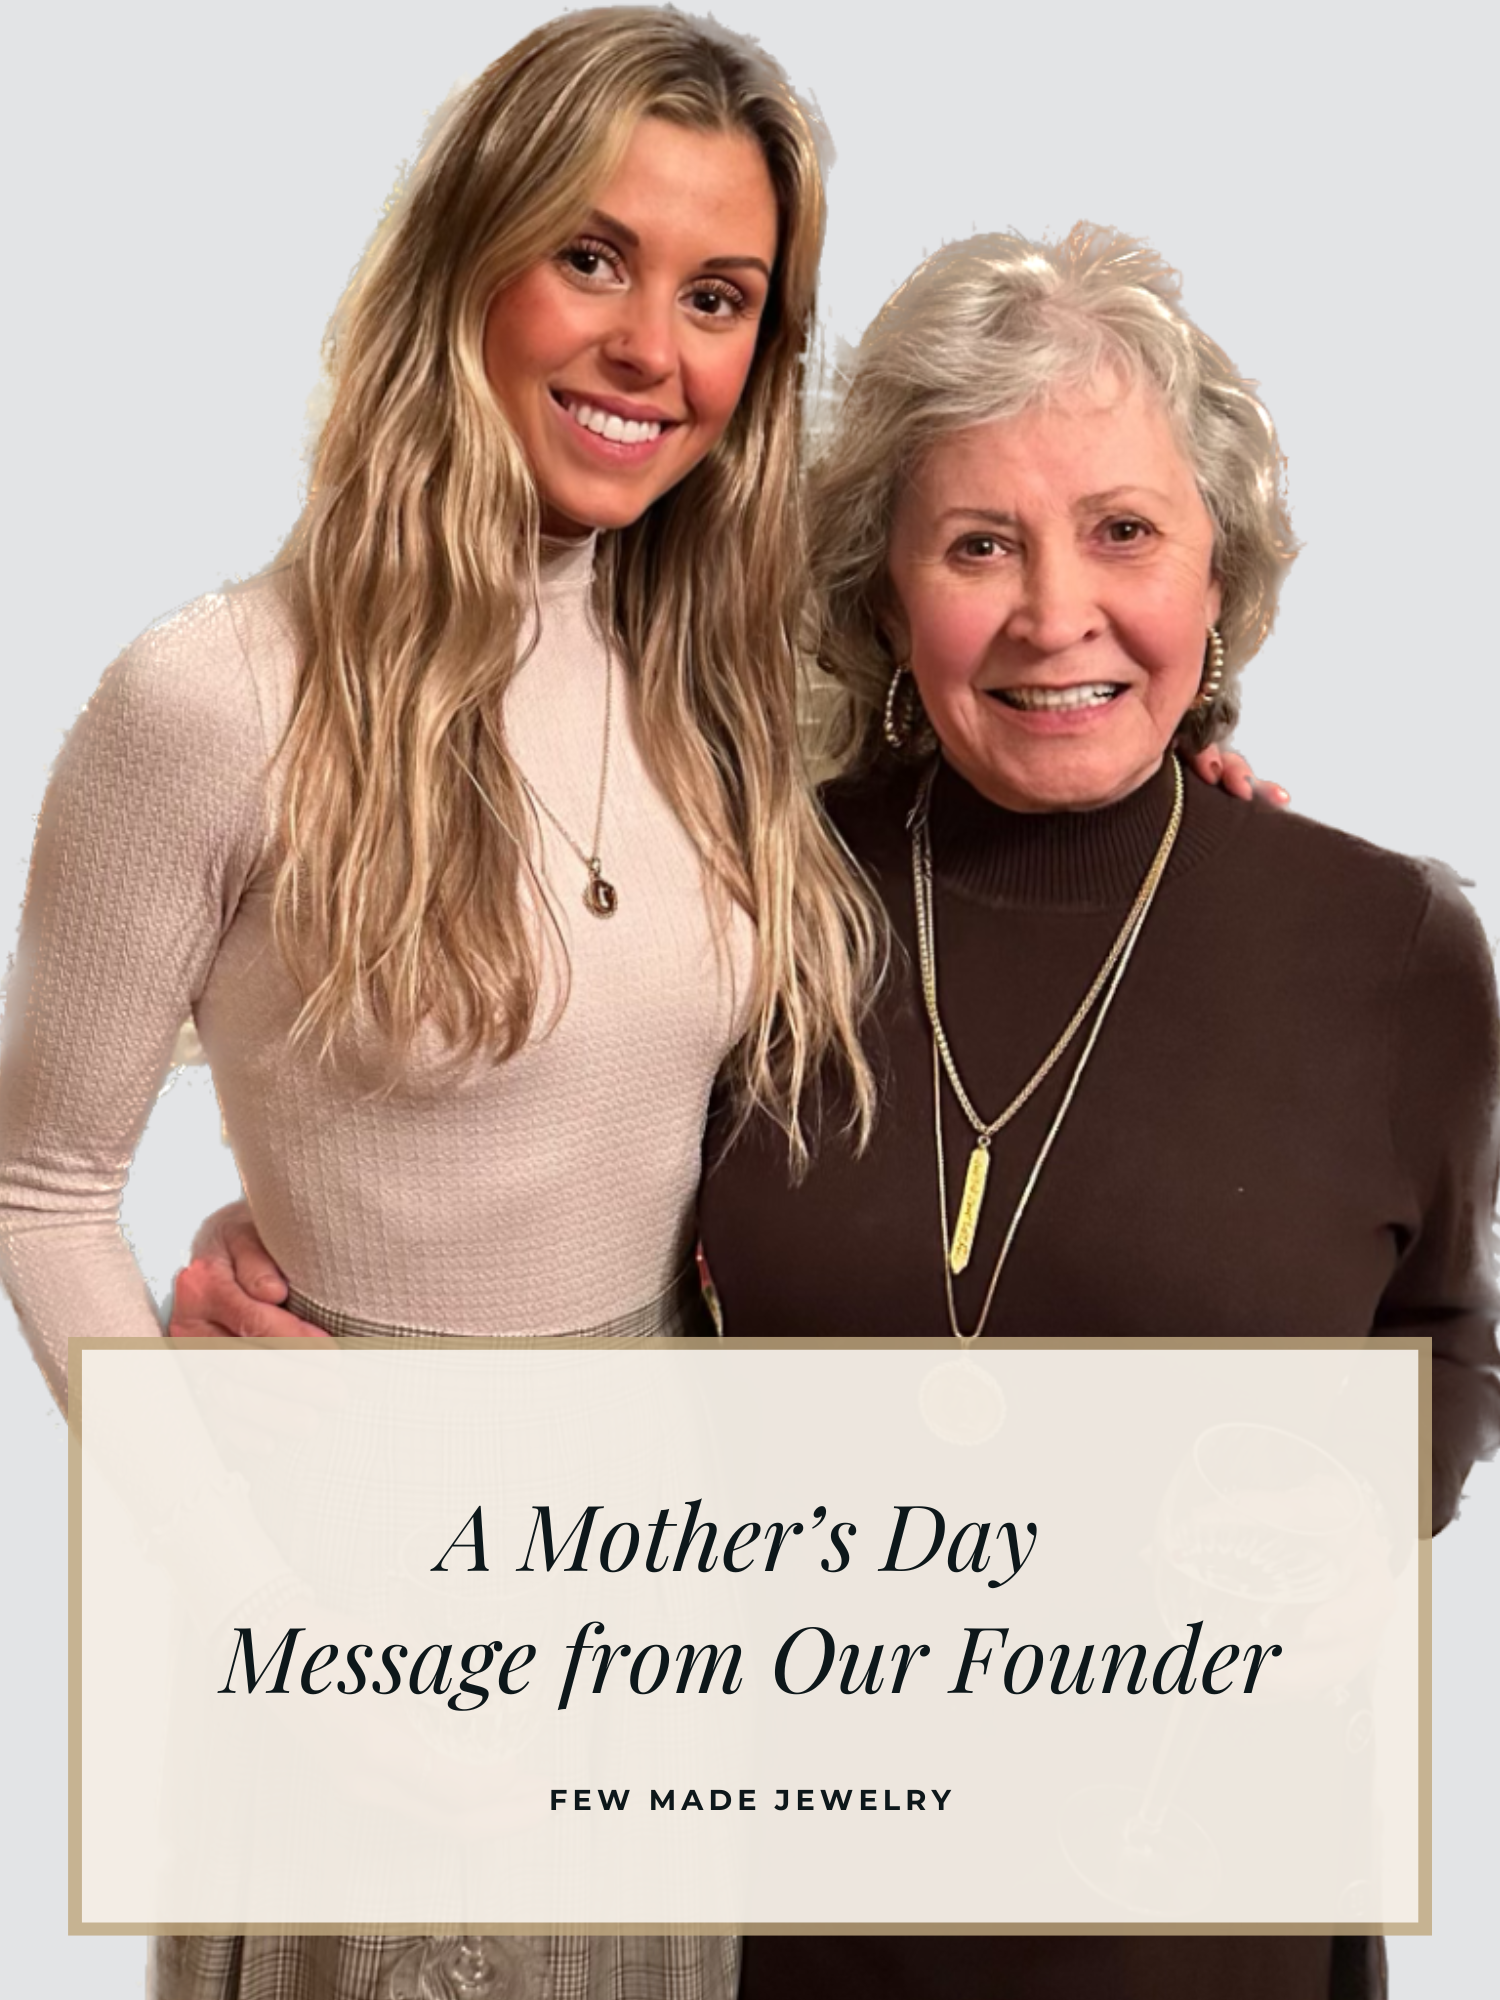 A Mother’s Day Message from Our Founder